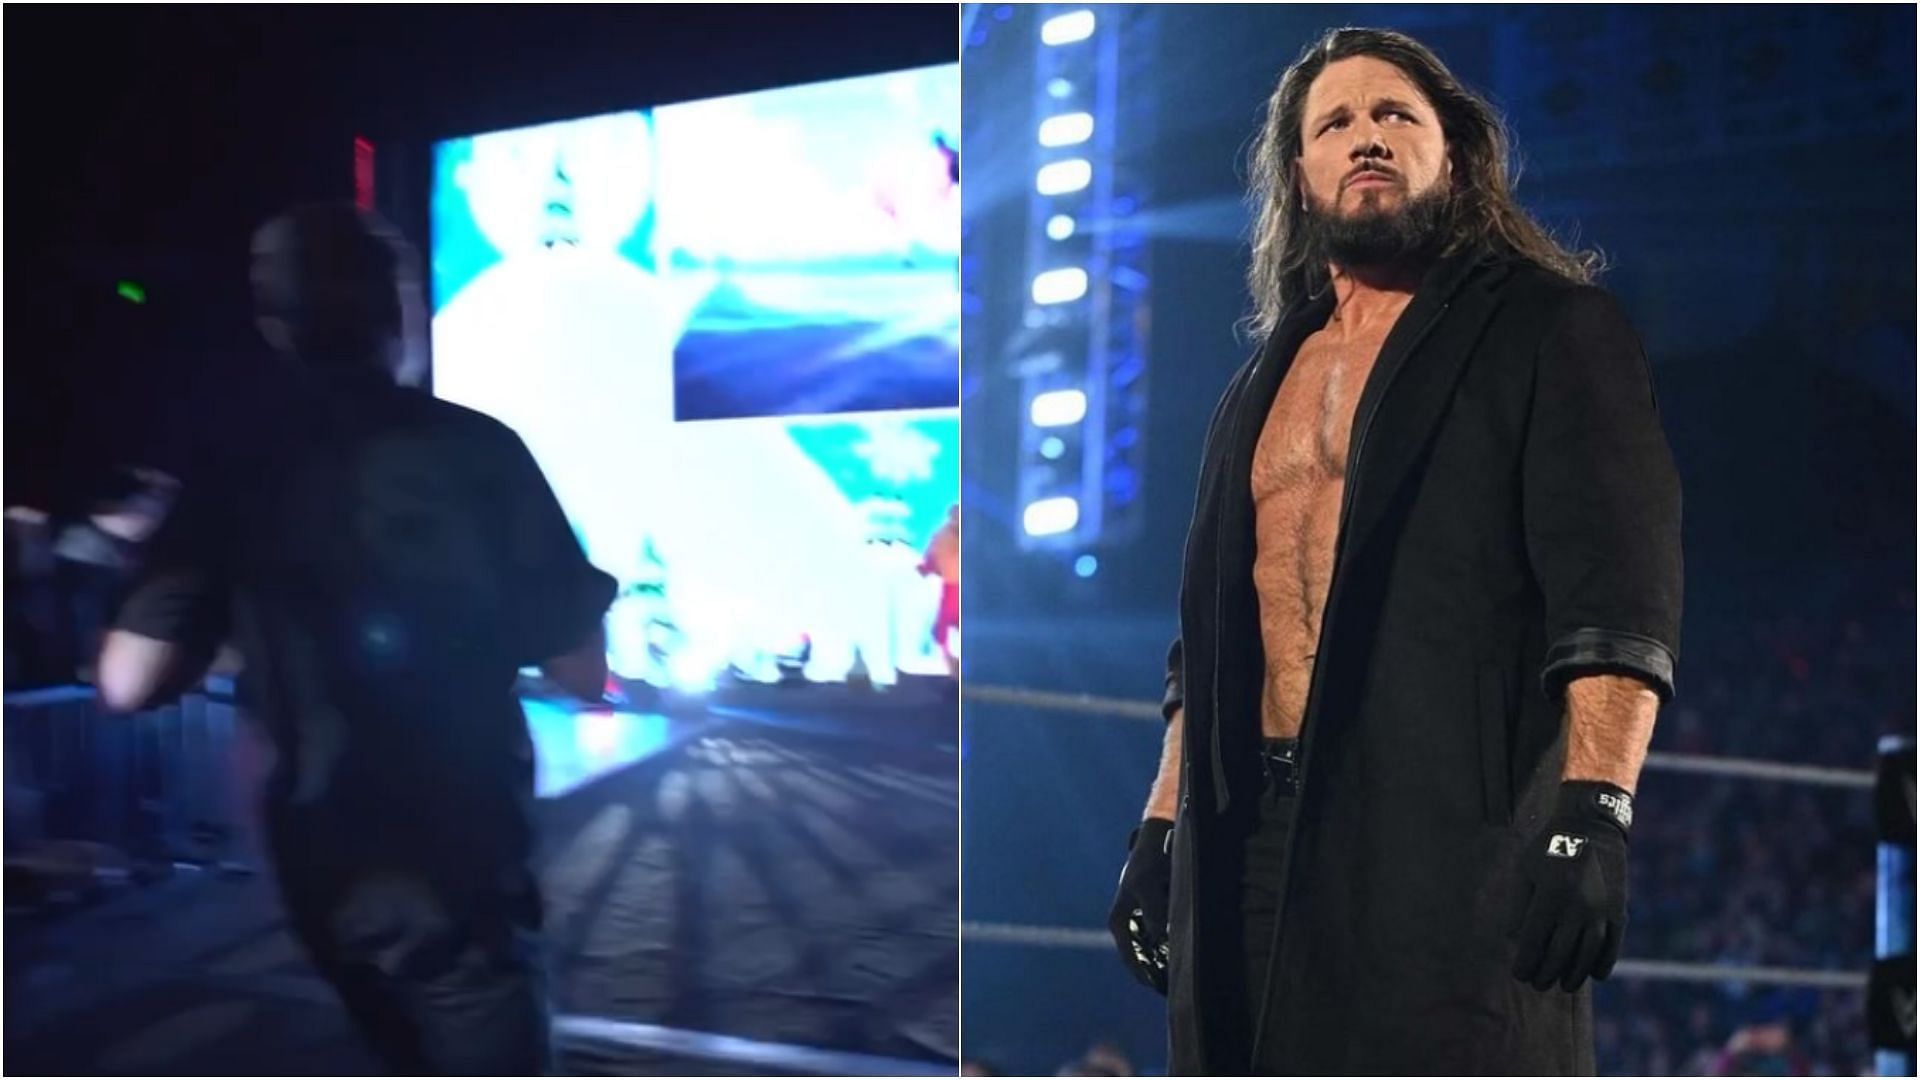 AJ Styles entertained WWE fans at a live event